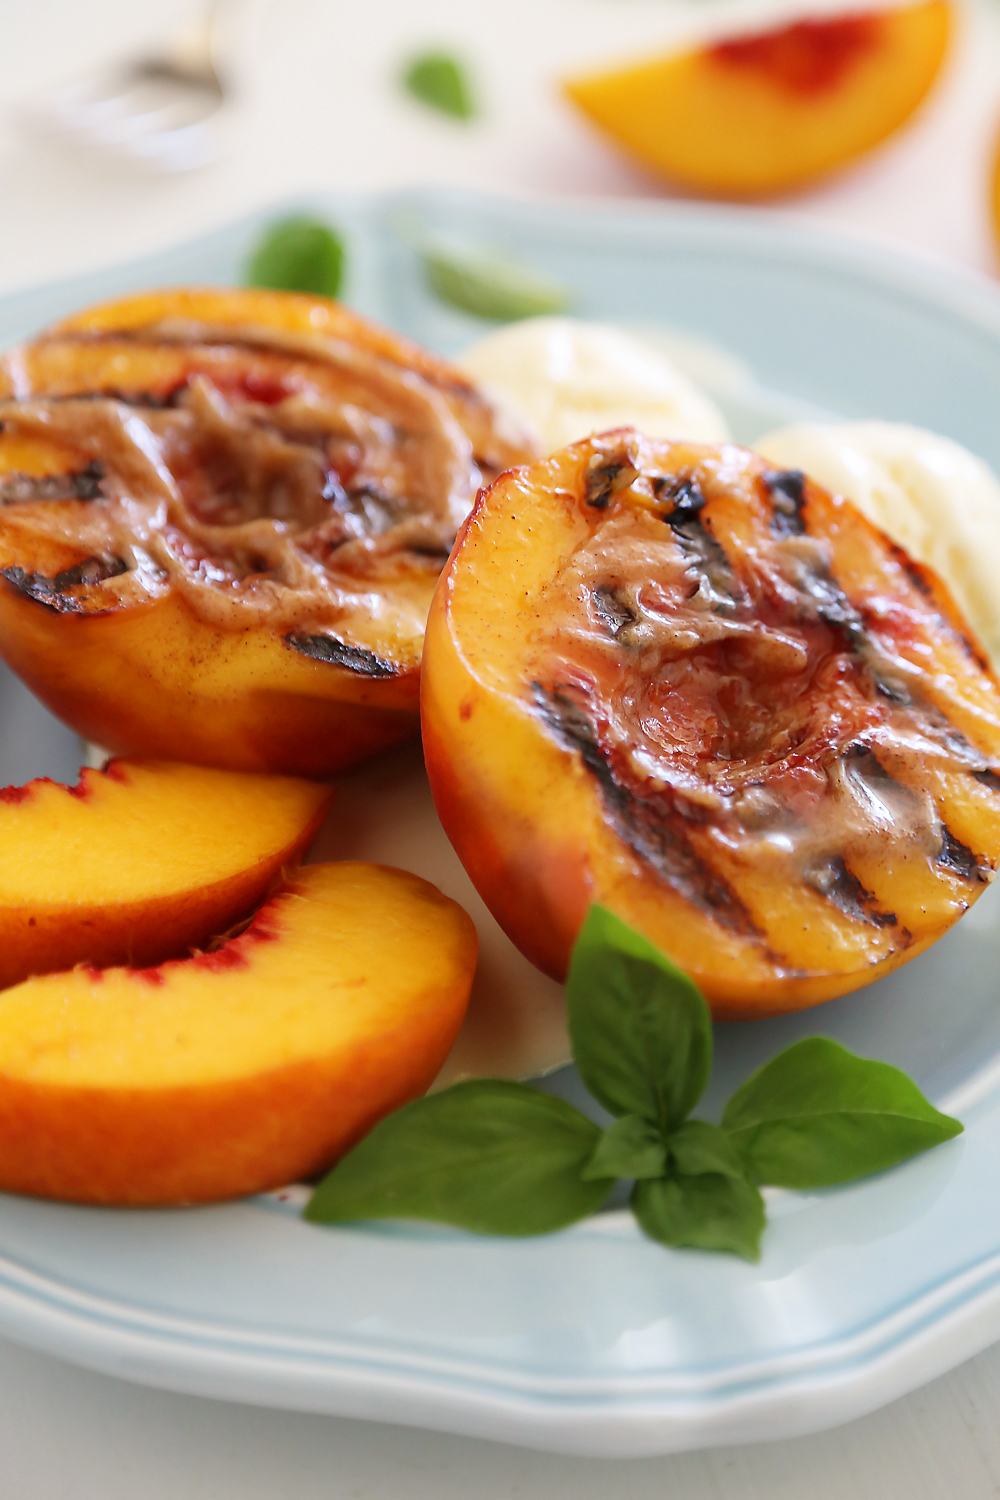 Grilled Peaches with Cinnamon-Sugar Butter – Juicy, sweet grilled summer peaches make a mouthwatering dessert with vanilla ice cream or whipped cream! thecomfortofcooking.com